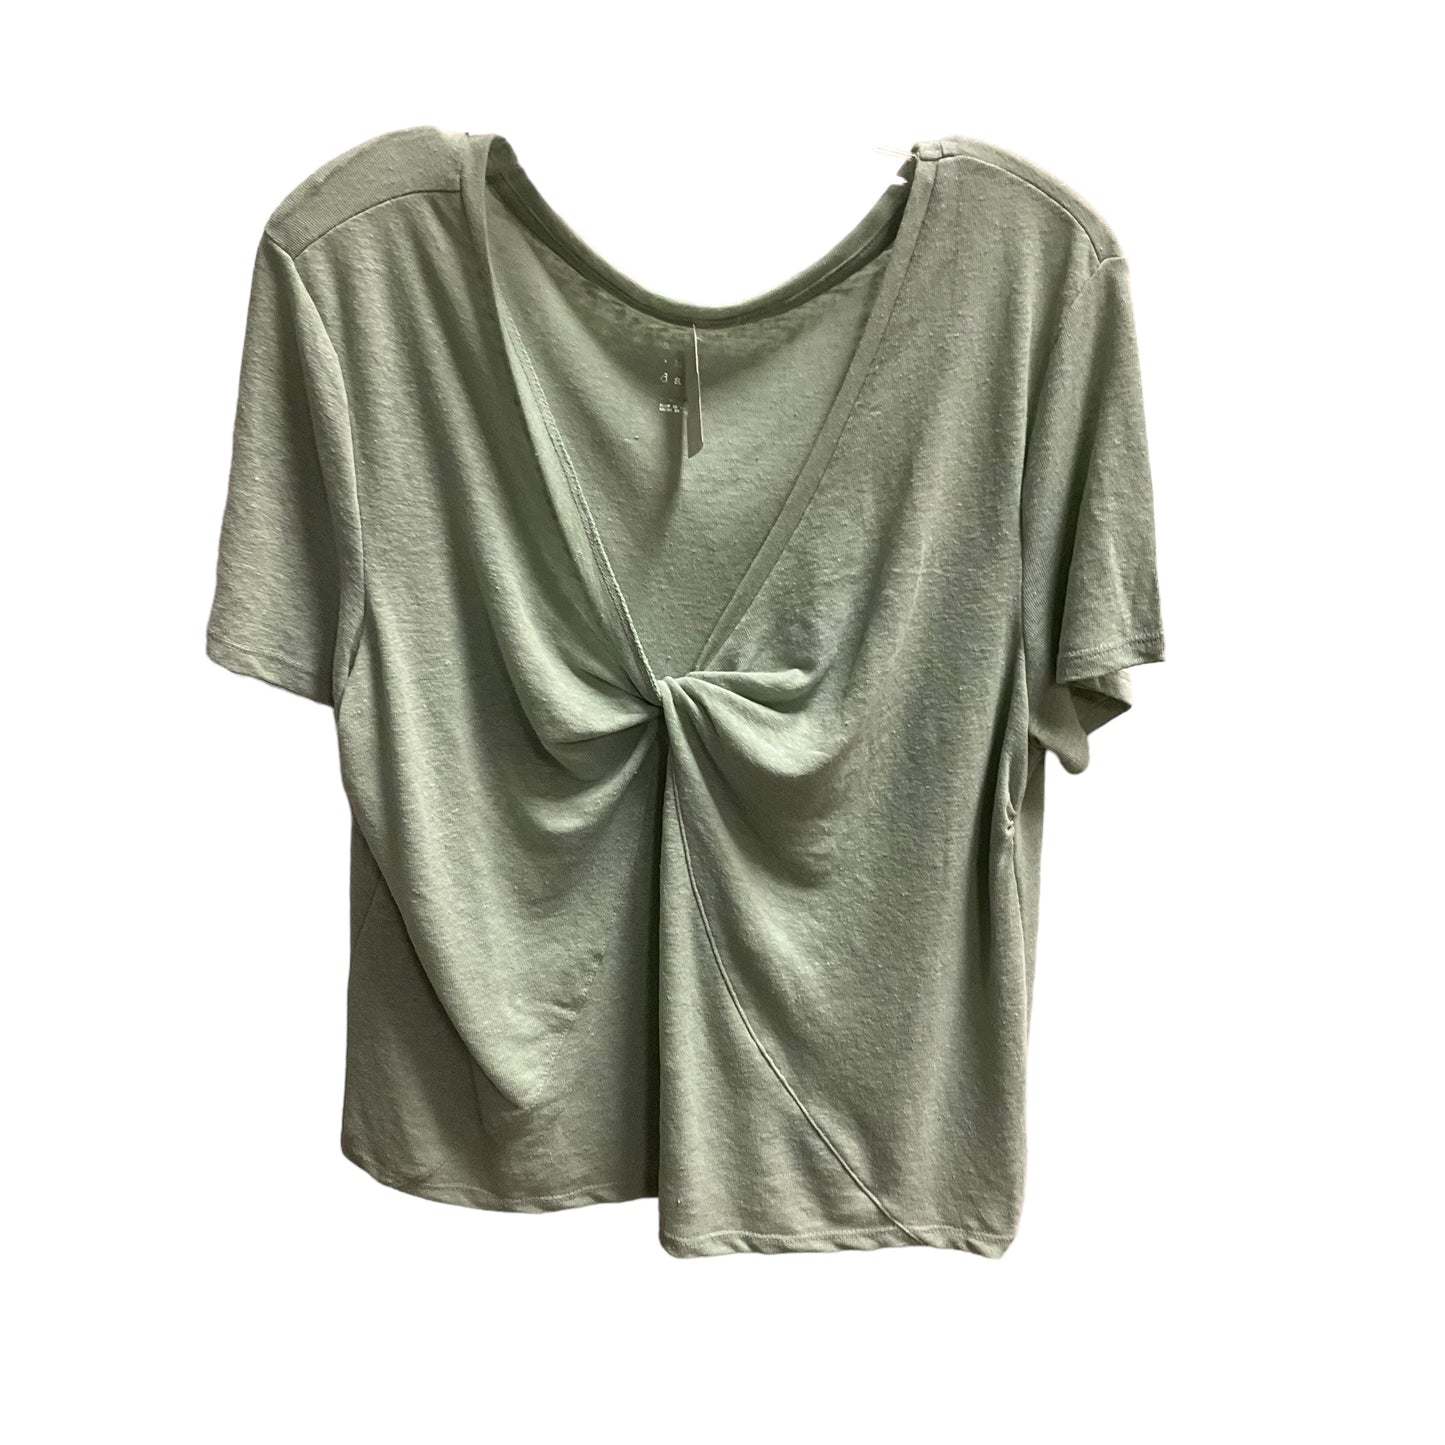 Green Top Short Sleeve A New Day, Size Xl